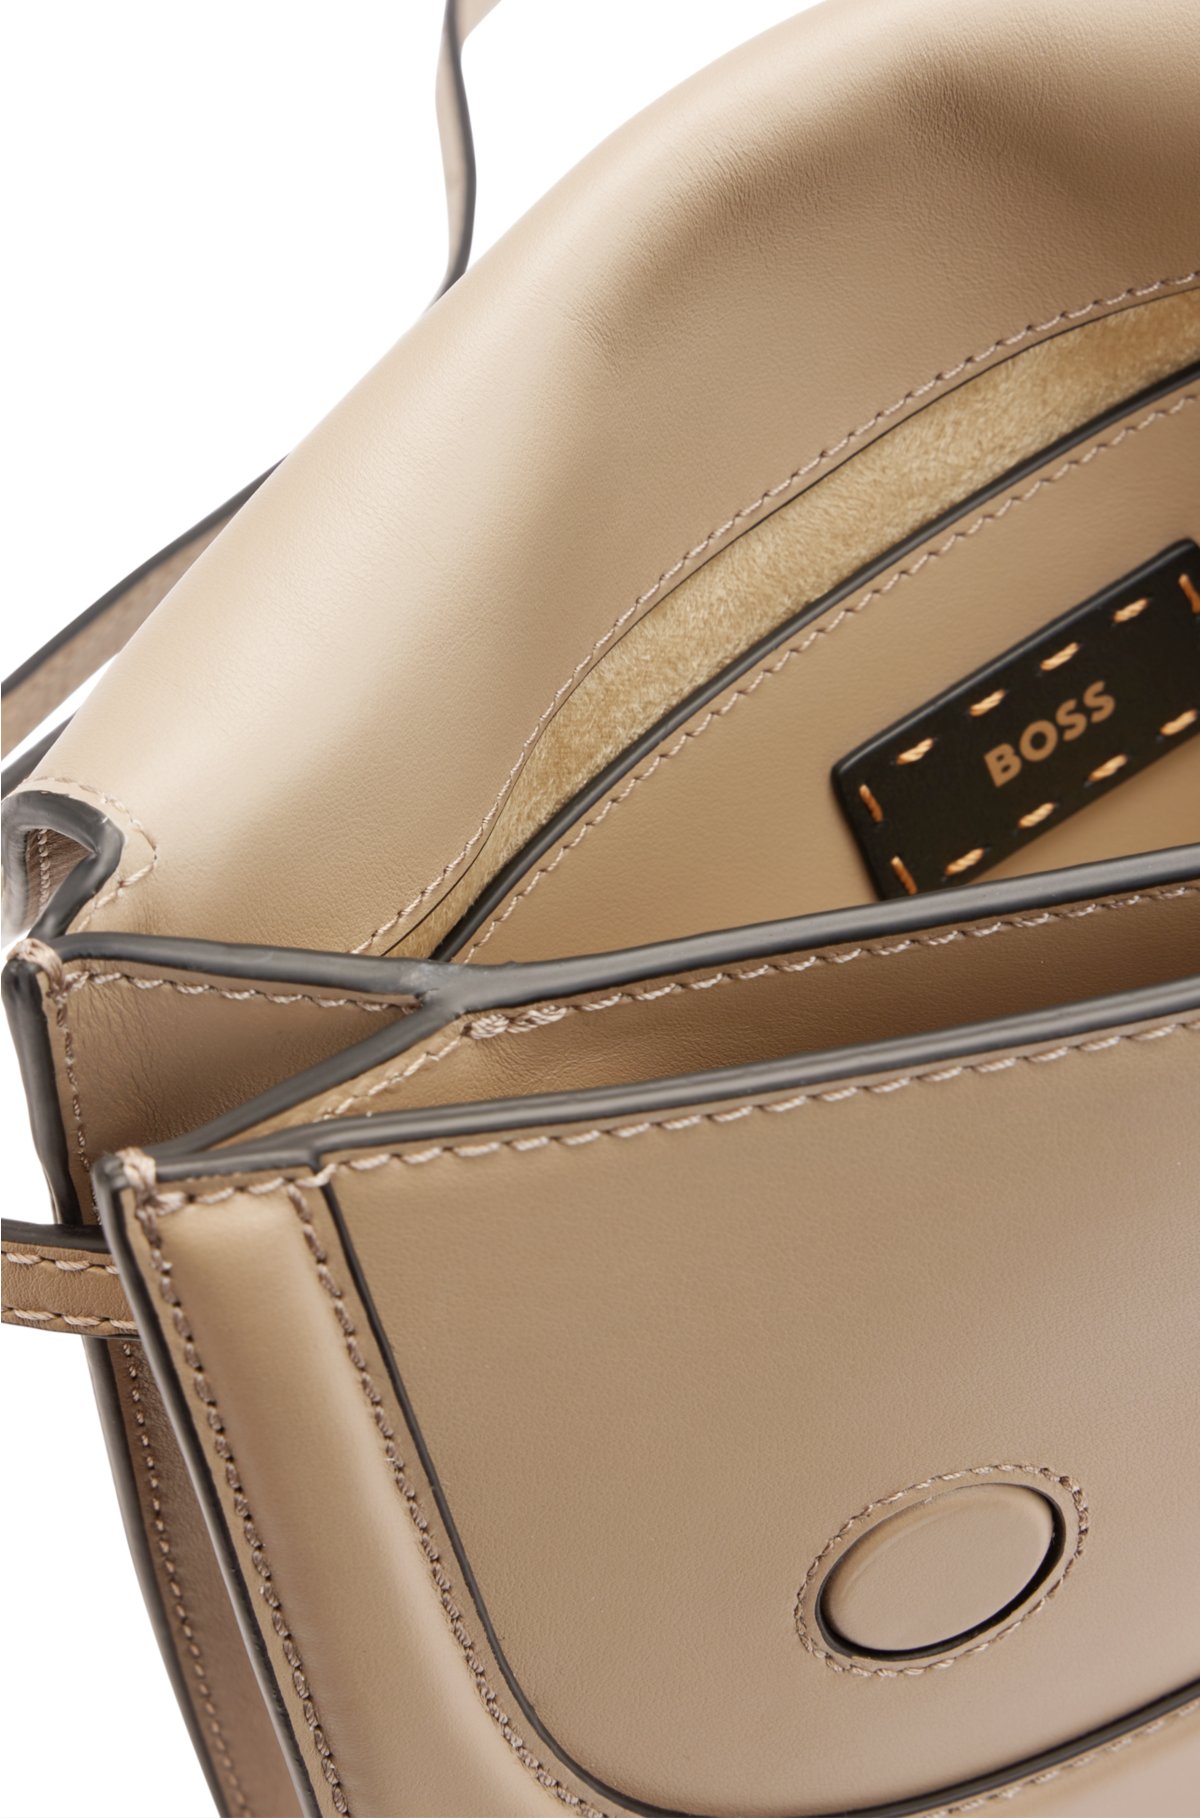 Crossbody bag in leather with signature details, Light Beige